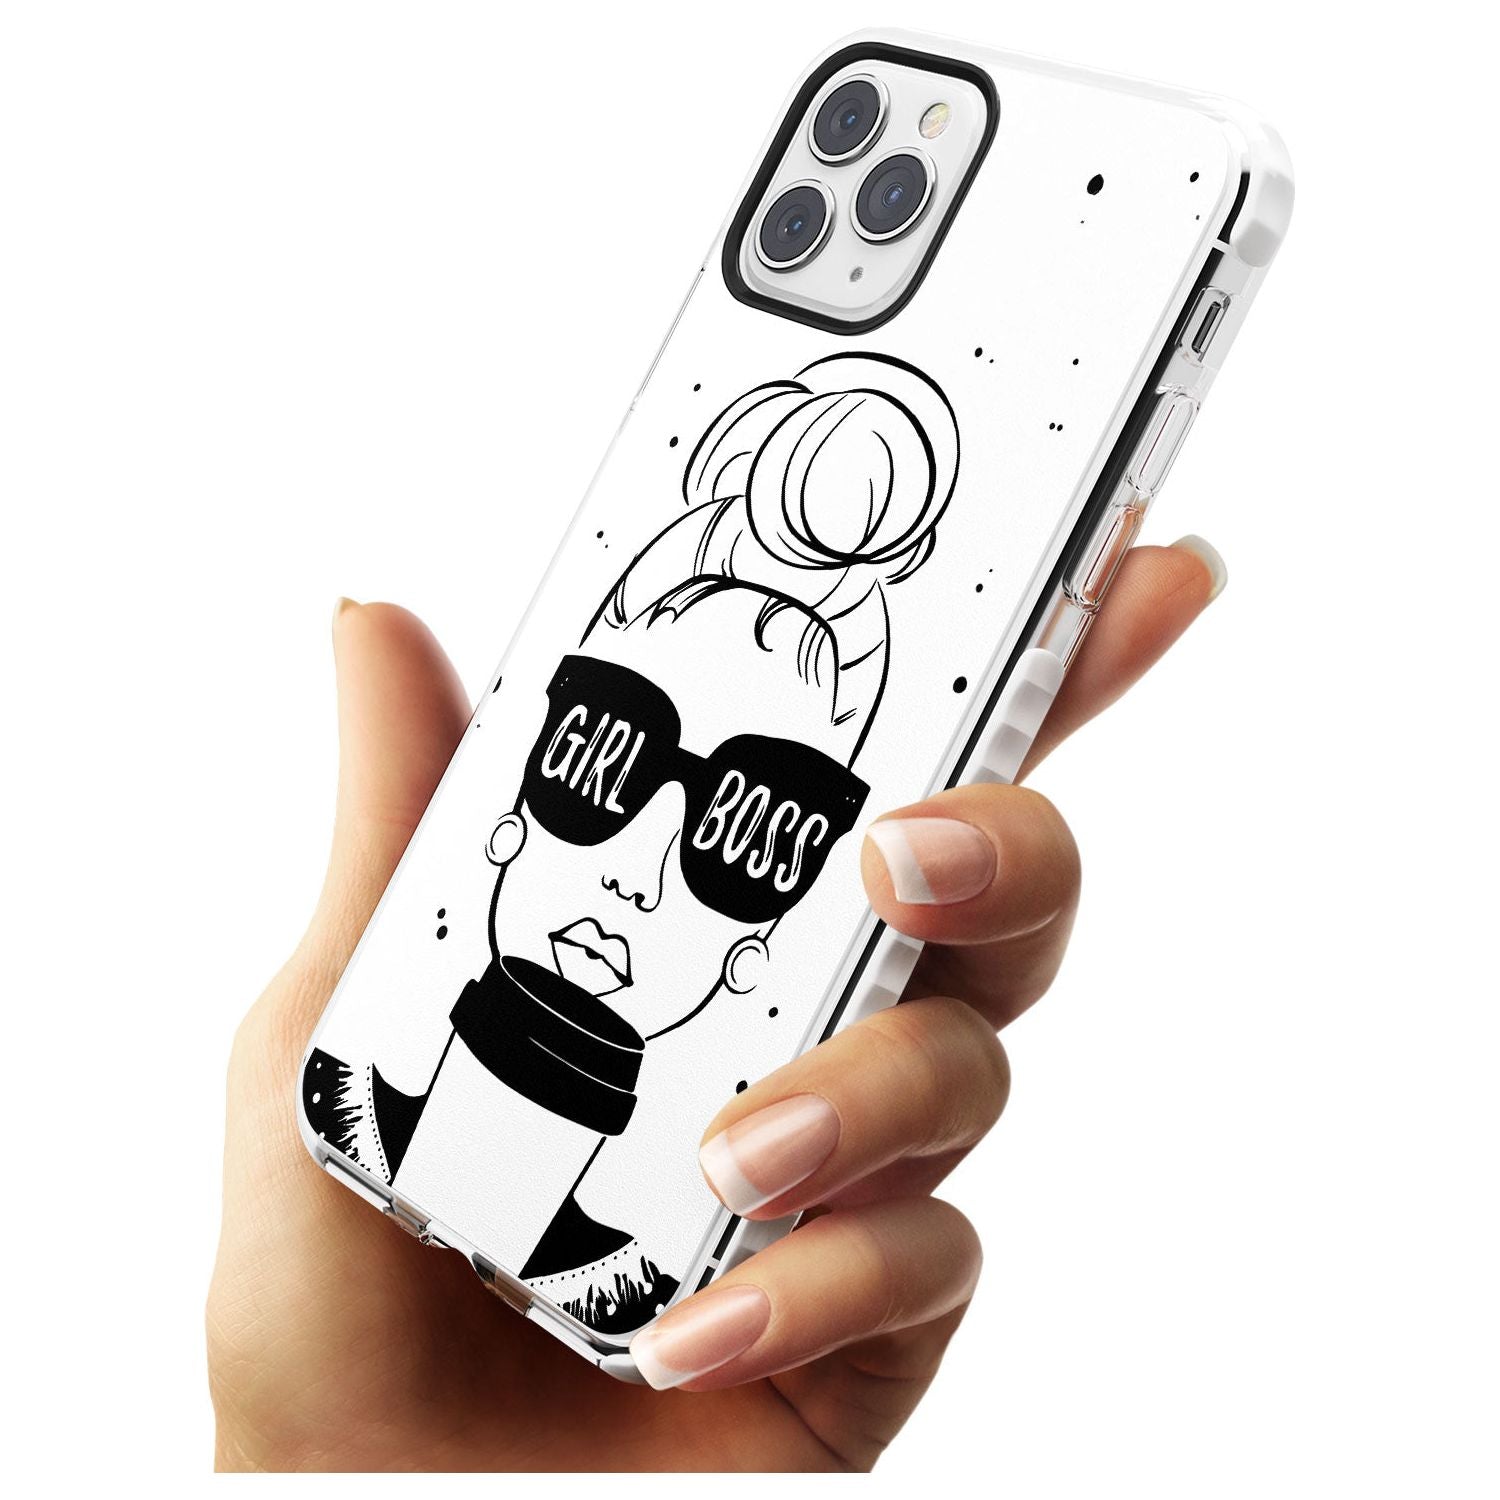 Girl Boss Impact Phone Case for iPhone 11 Pro Max